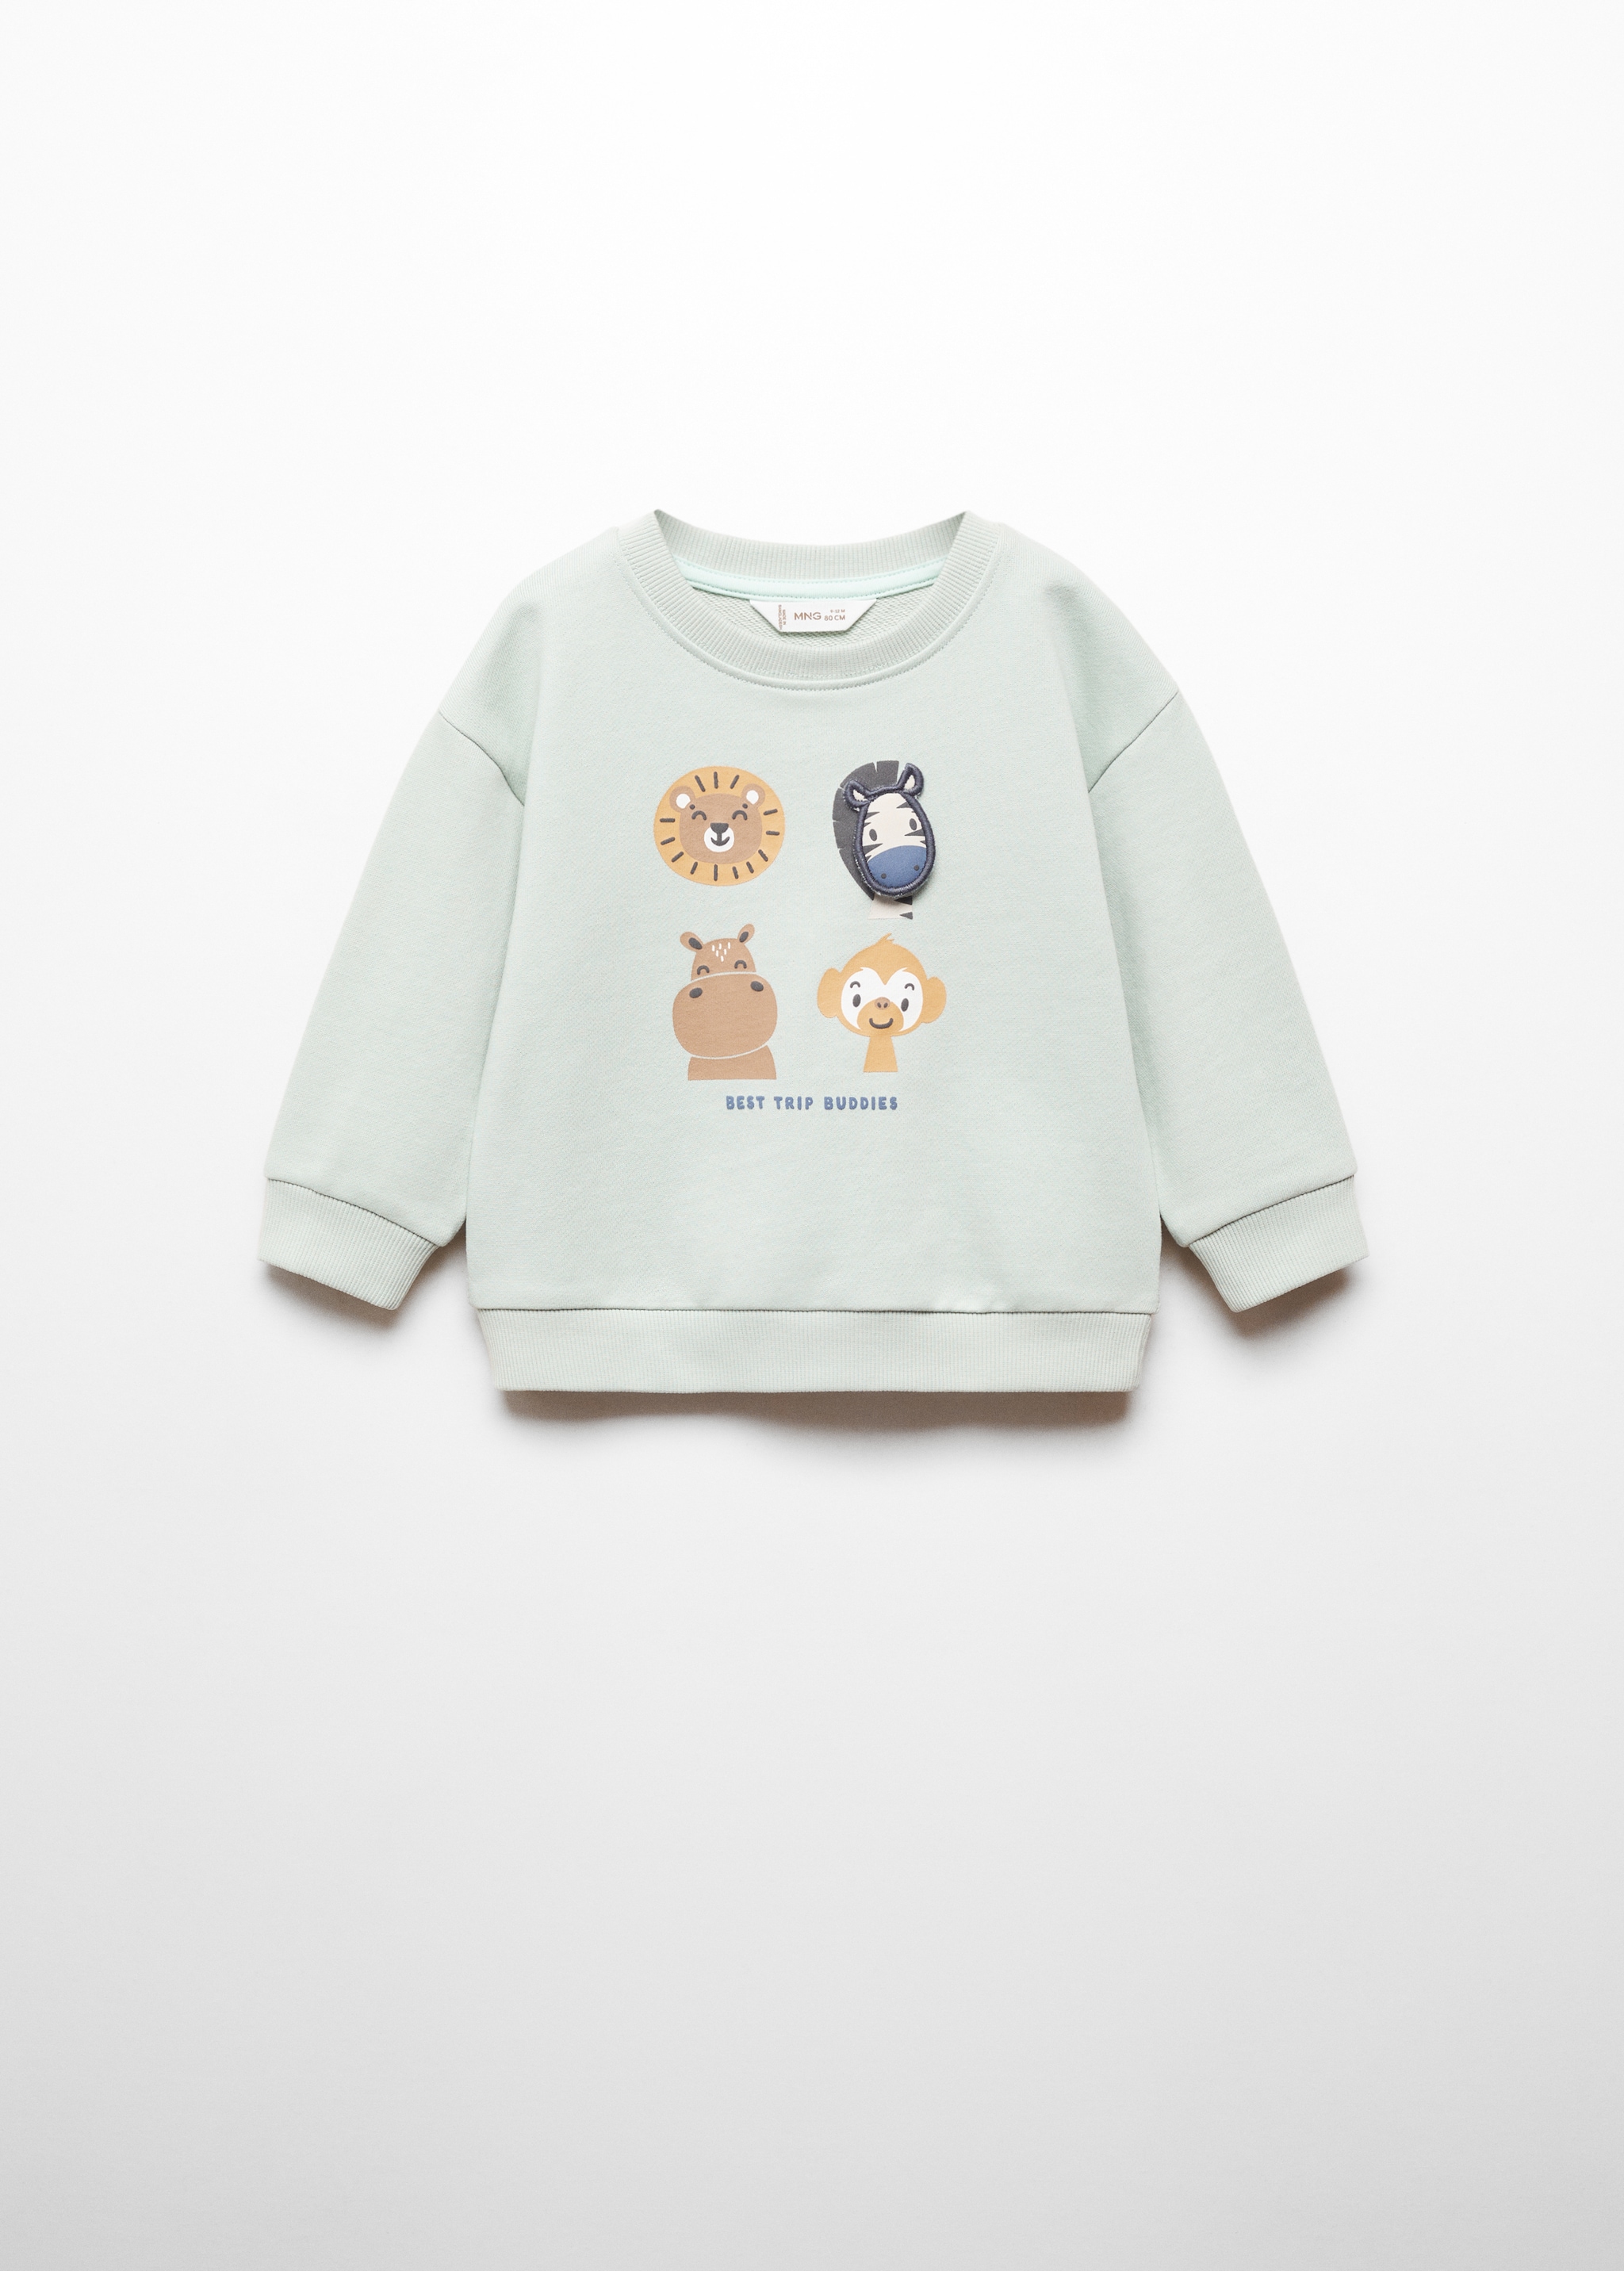 Printed picture sweatshirt - Article without model